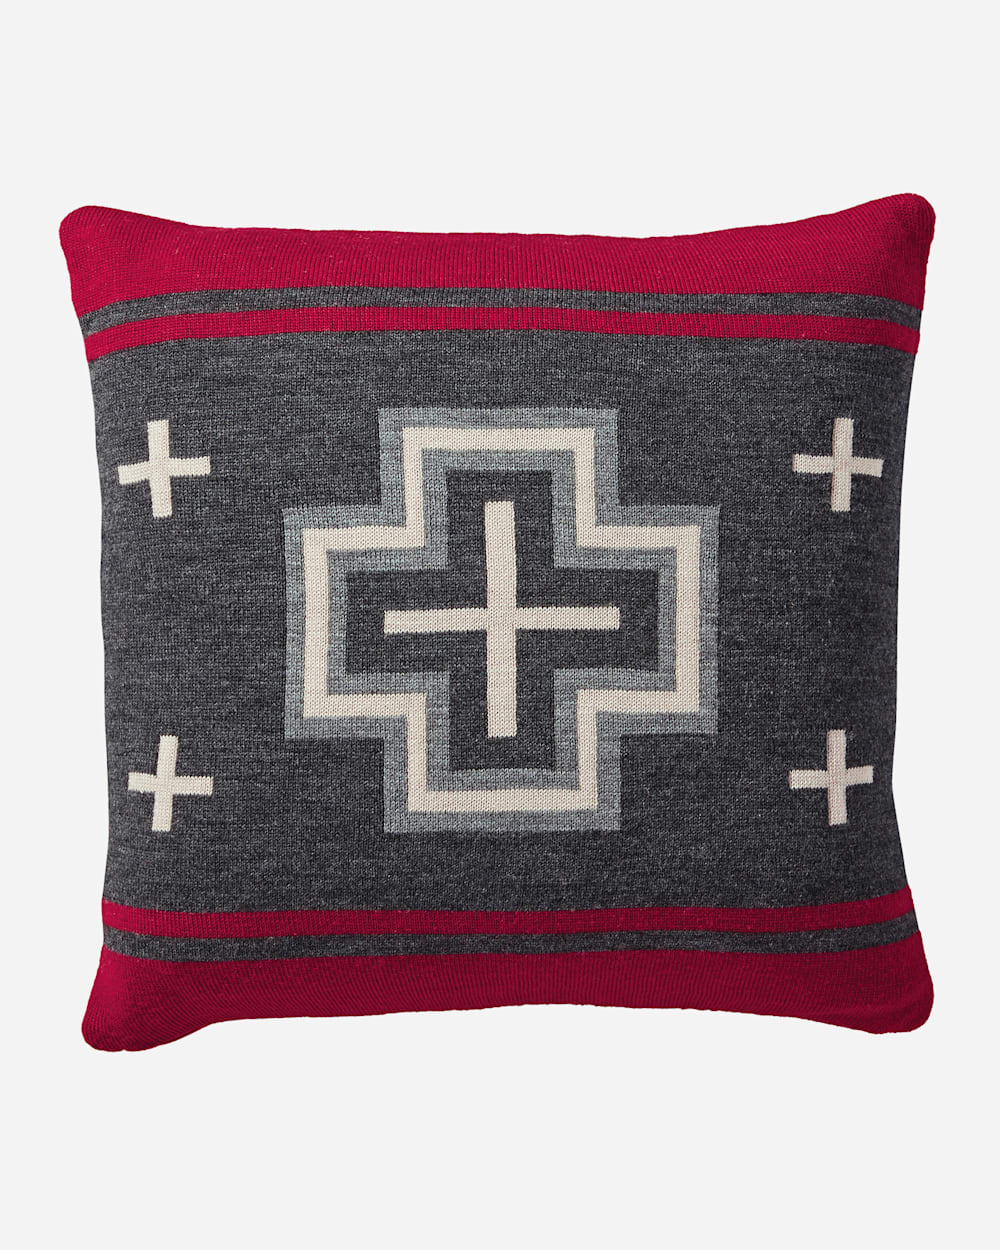 SAN MIGUEL KNIT PILLOW IN GREY image number 1